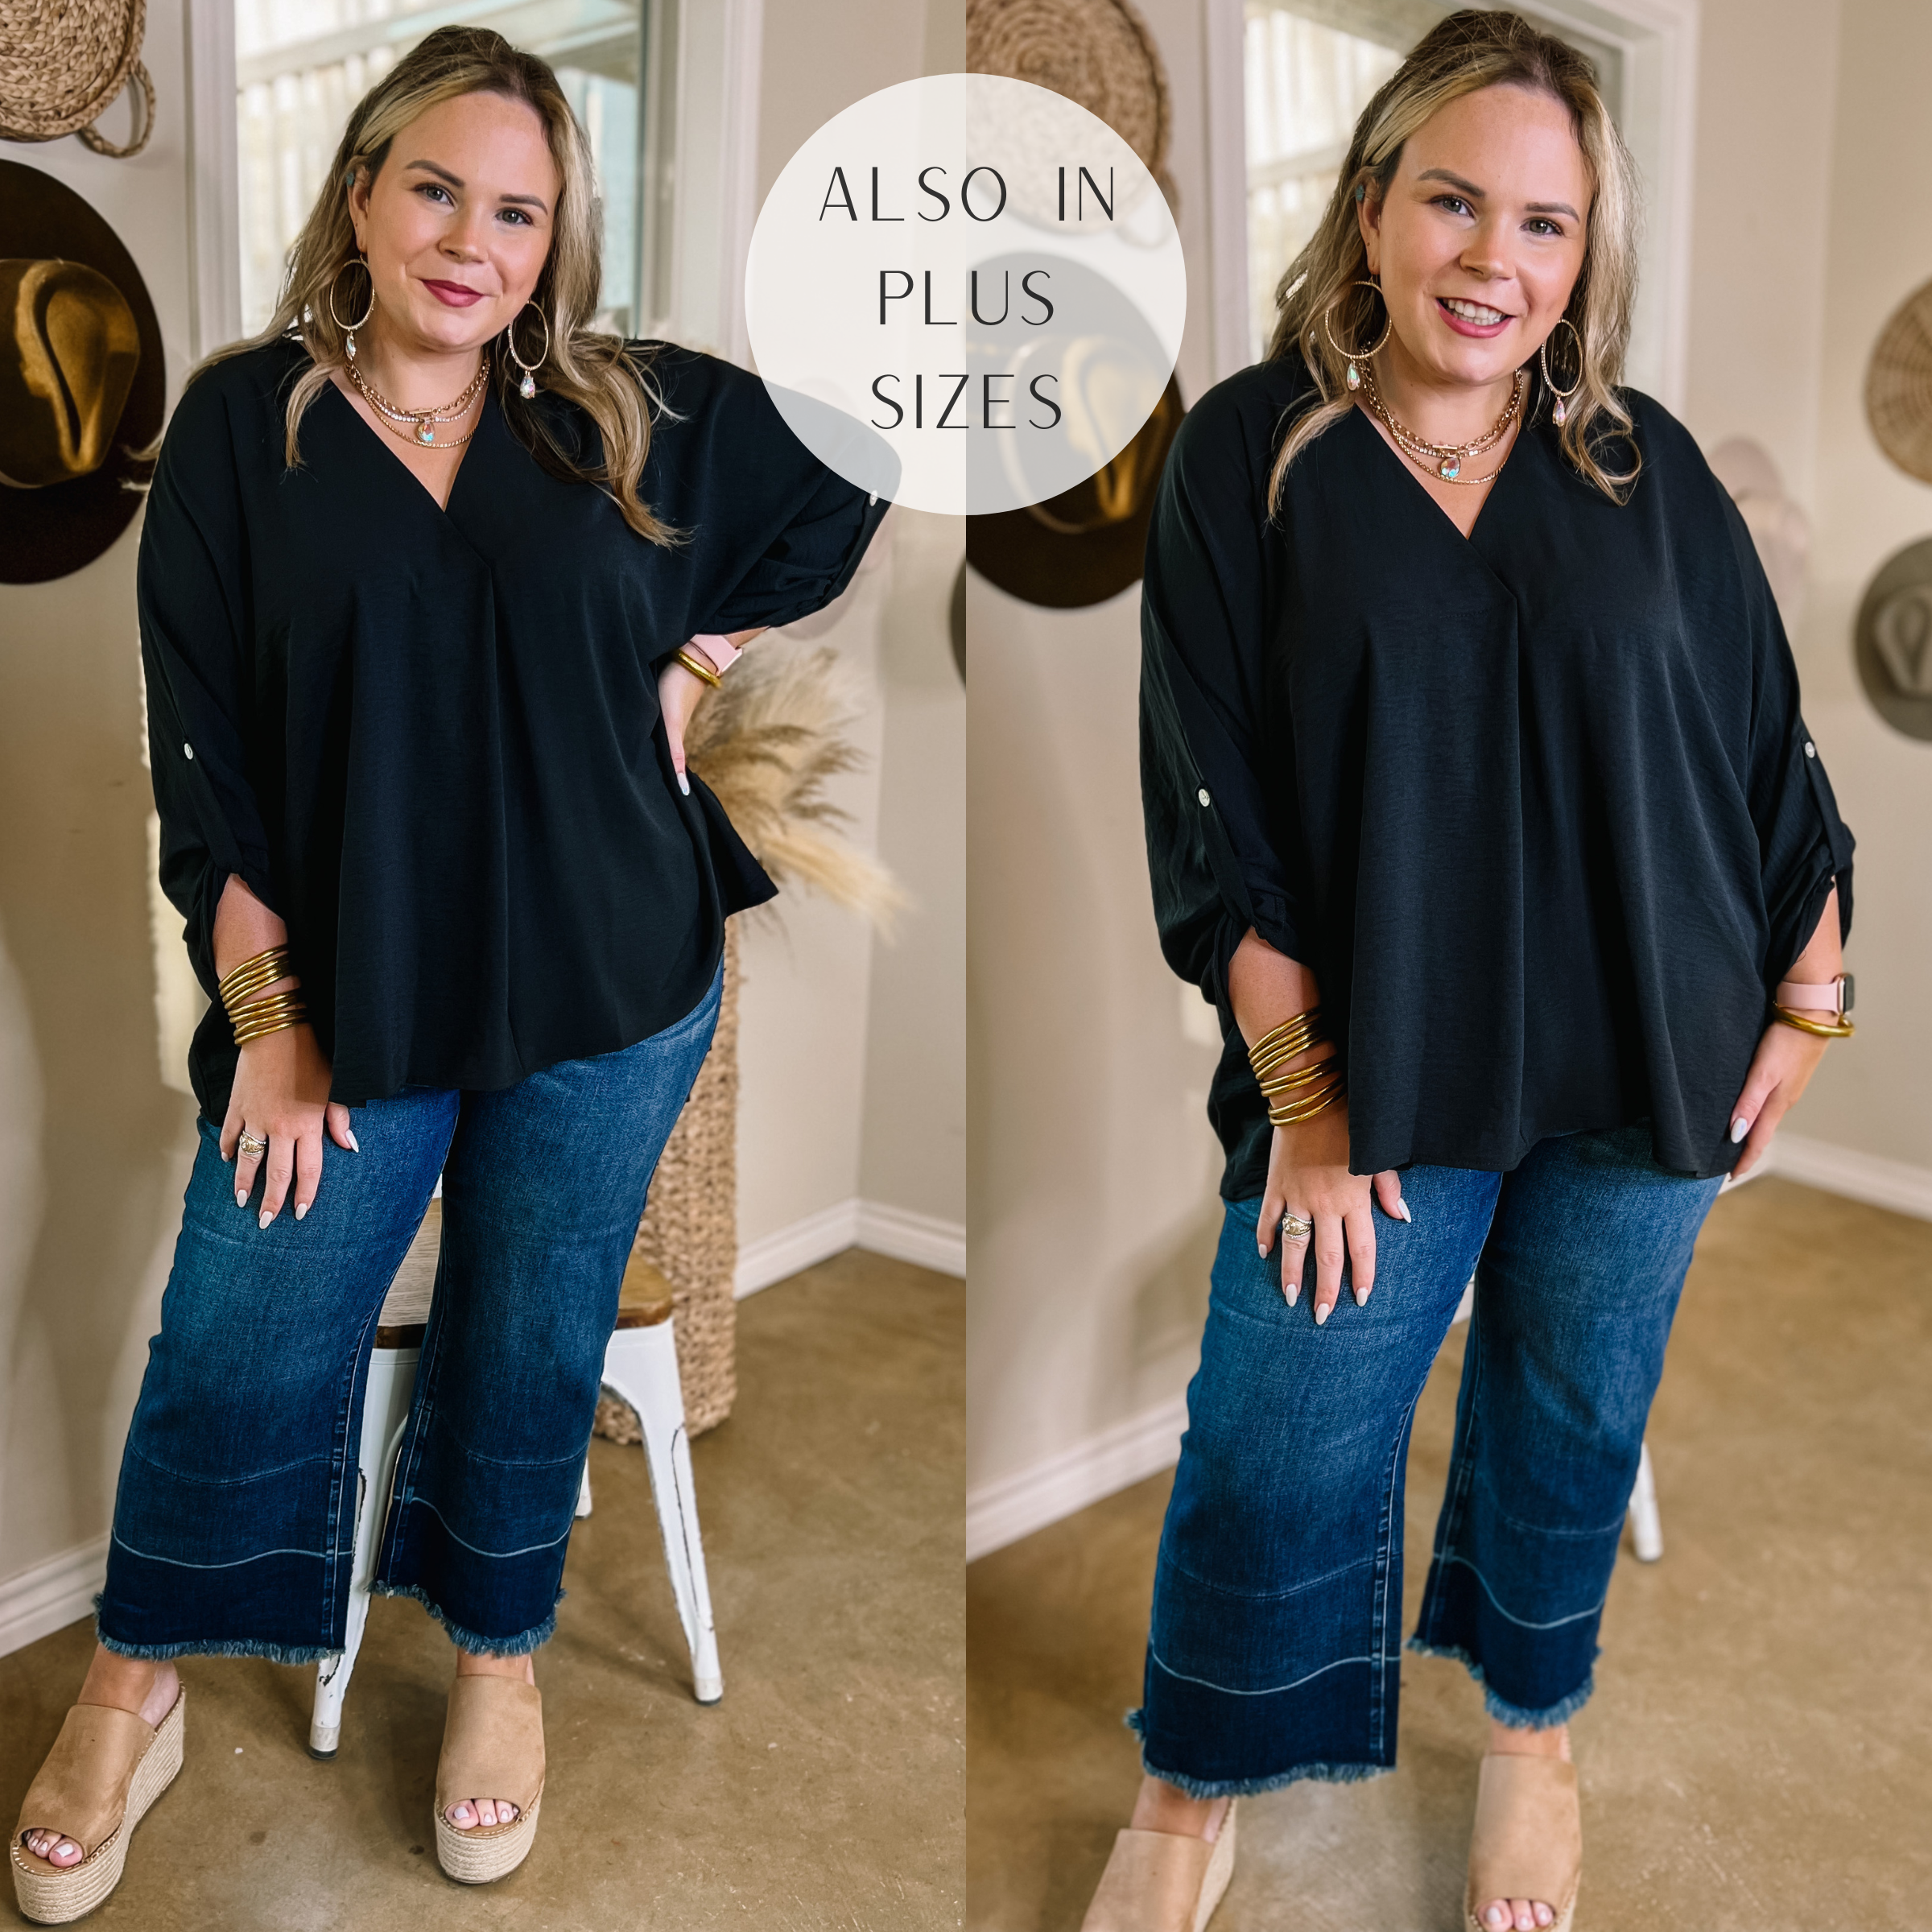 Model is wearing a black 3/4 sleeve top with a placket, and a flowy fit. Model has it paired with cropped denim jeans, tan wedges, and gold jewelry.